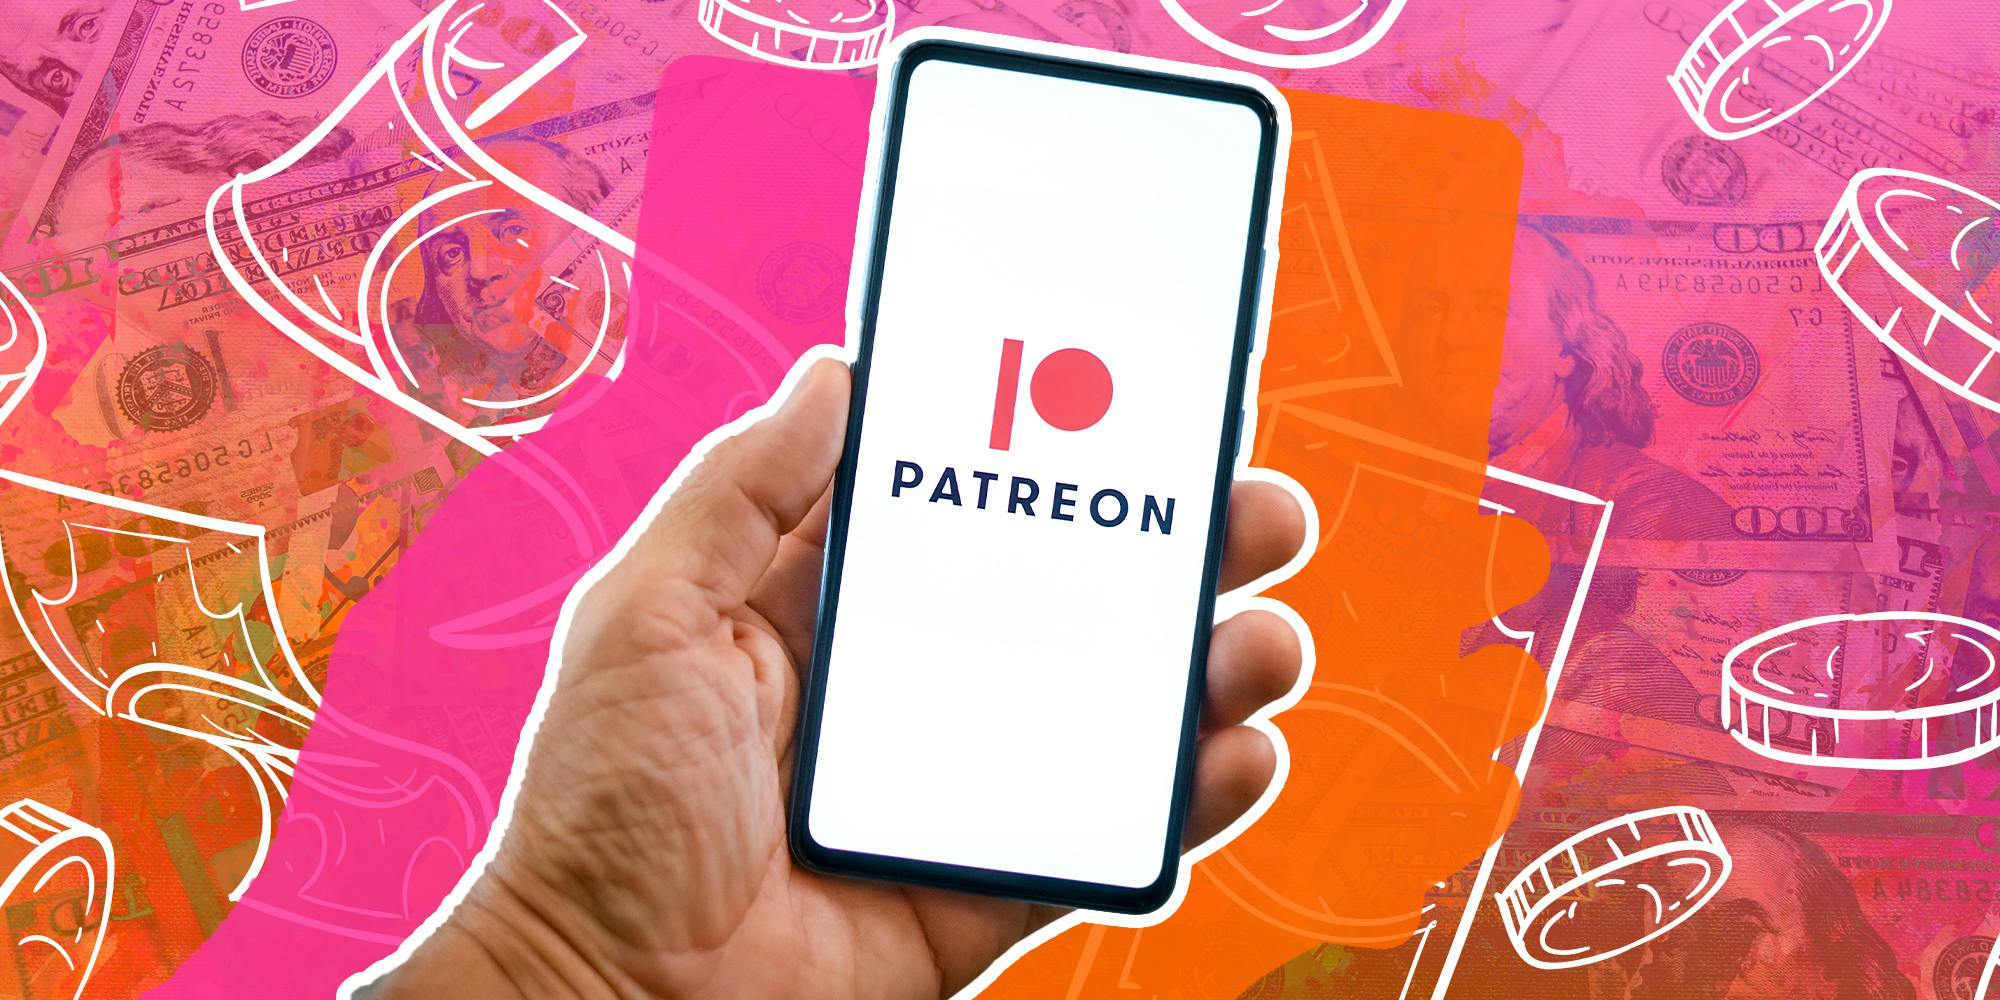 How To Earn And Withdraw Money From Patreon